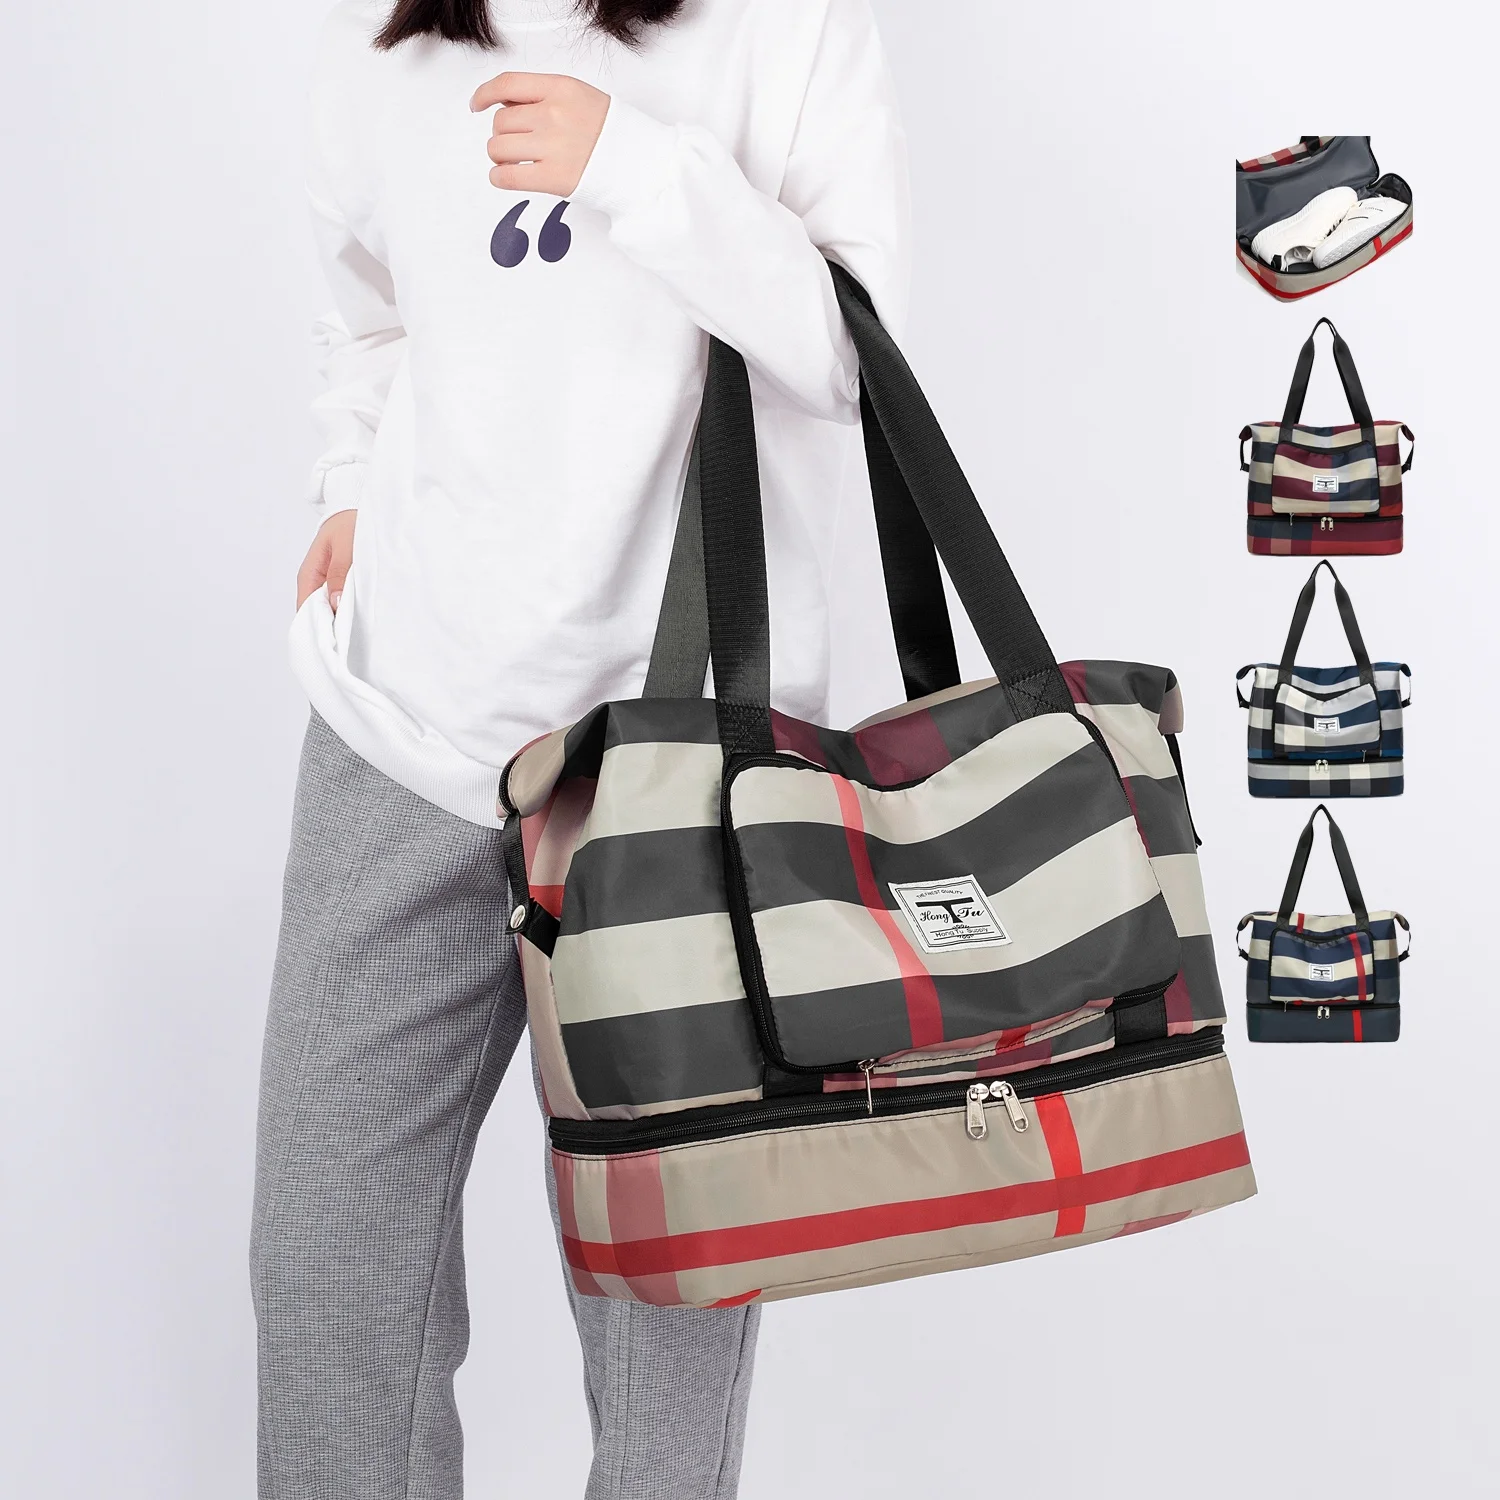 

Foldable Sneaker Ladies Hand Carry Plaid Colorful Large Capacity Waterproof Weekend Tote Duffle Travel Bag with Shoe Compartment